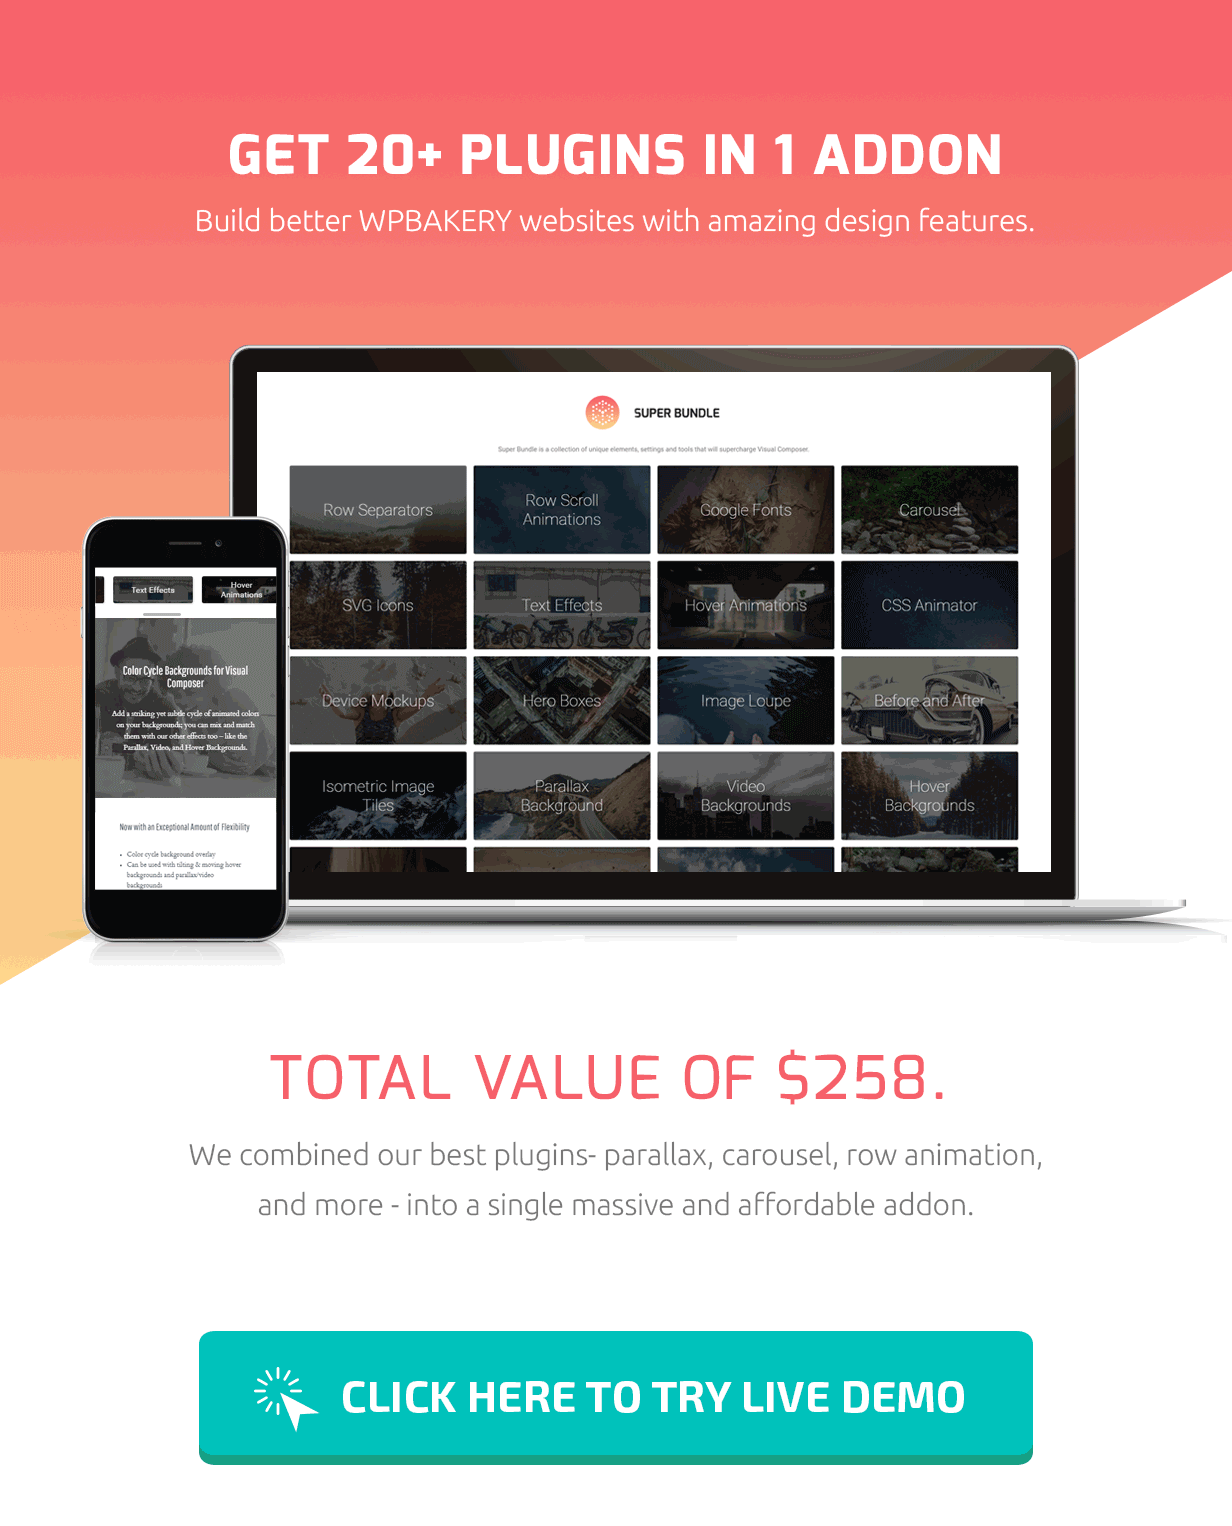 Get 20+ plugins in 1 addon. Build better WPBakery websites with amazing design features